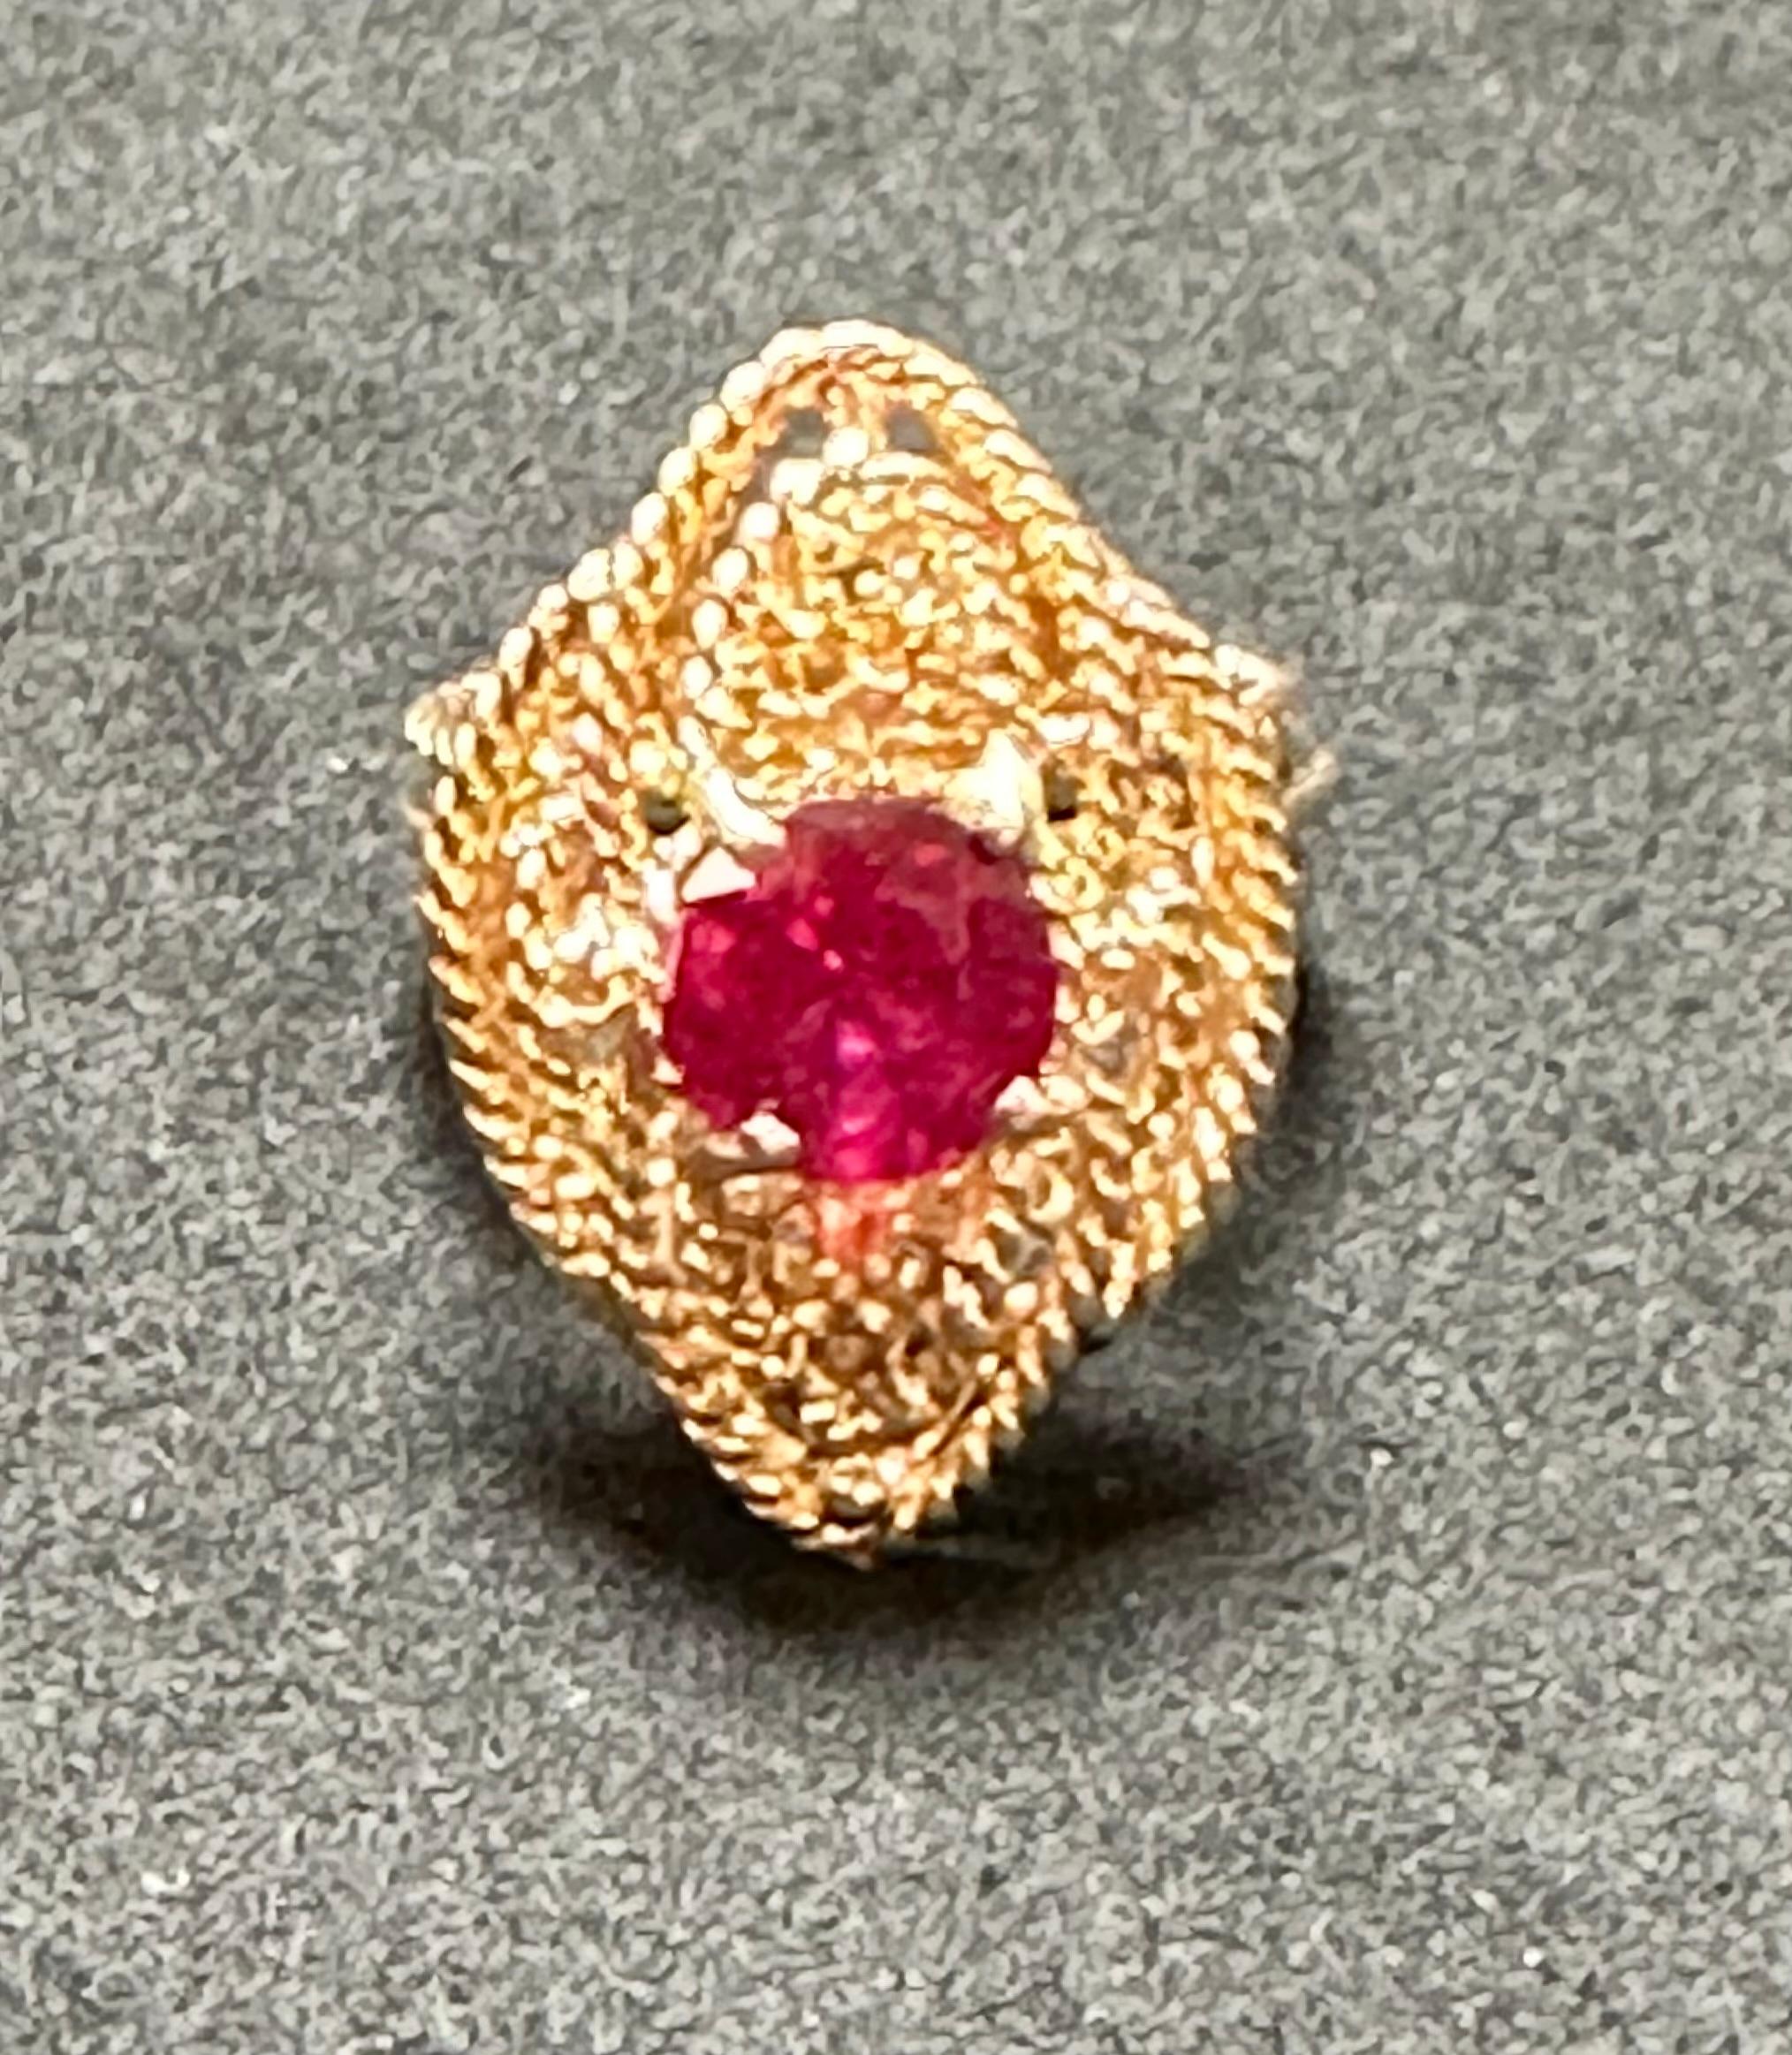 Introducing our exquisite Vintage 14 Karat Yellow Gold Cocktail Ring featuring a stunning 2 carat treated round ruby. This captivating ring showcases the ruby in a four-prong setting, enhancing its beauty and allowing the light to play off its